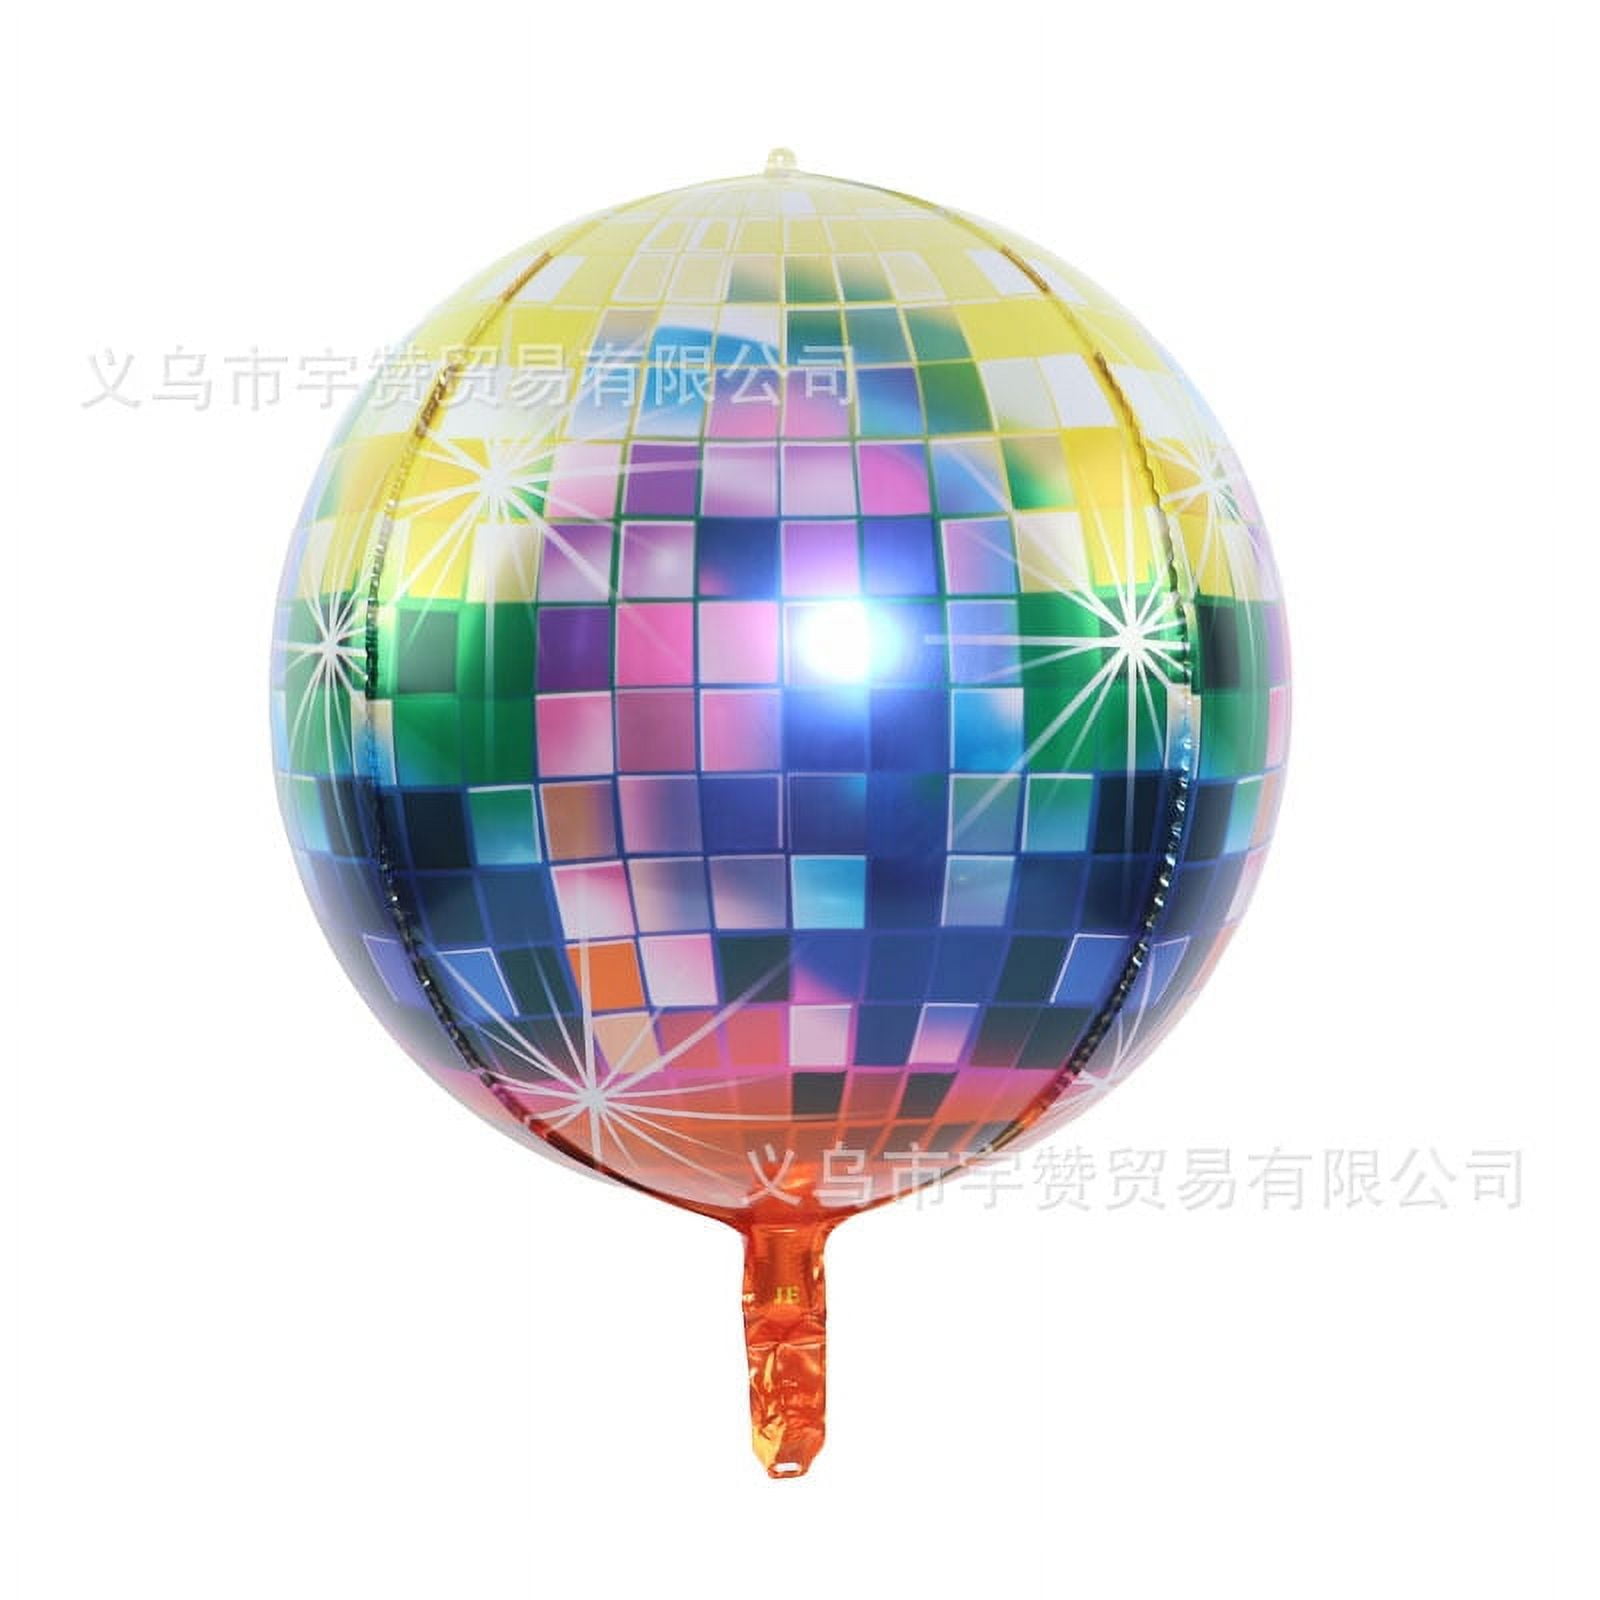 4D Balloons, Colorful Happy Birthday Mylar Balloons, 22 Inches Clear Round Rainbow Foil Balloons, Birthday Decorations, Party Supplies for Kids